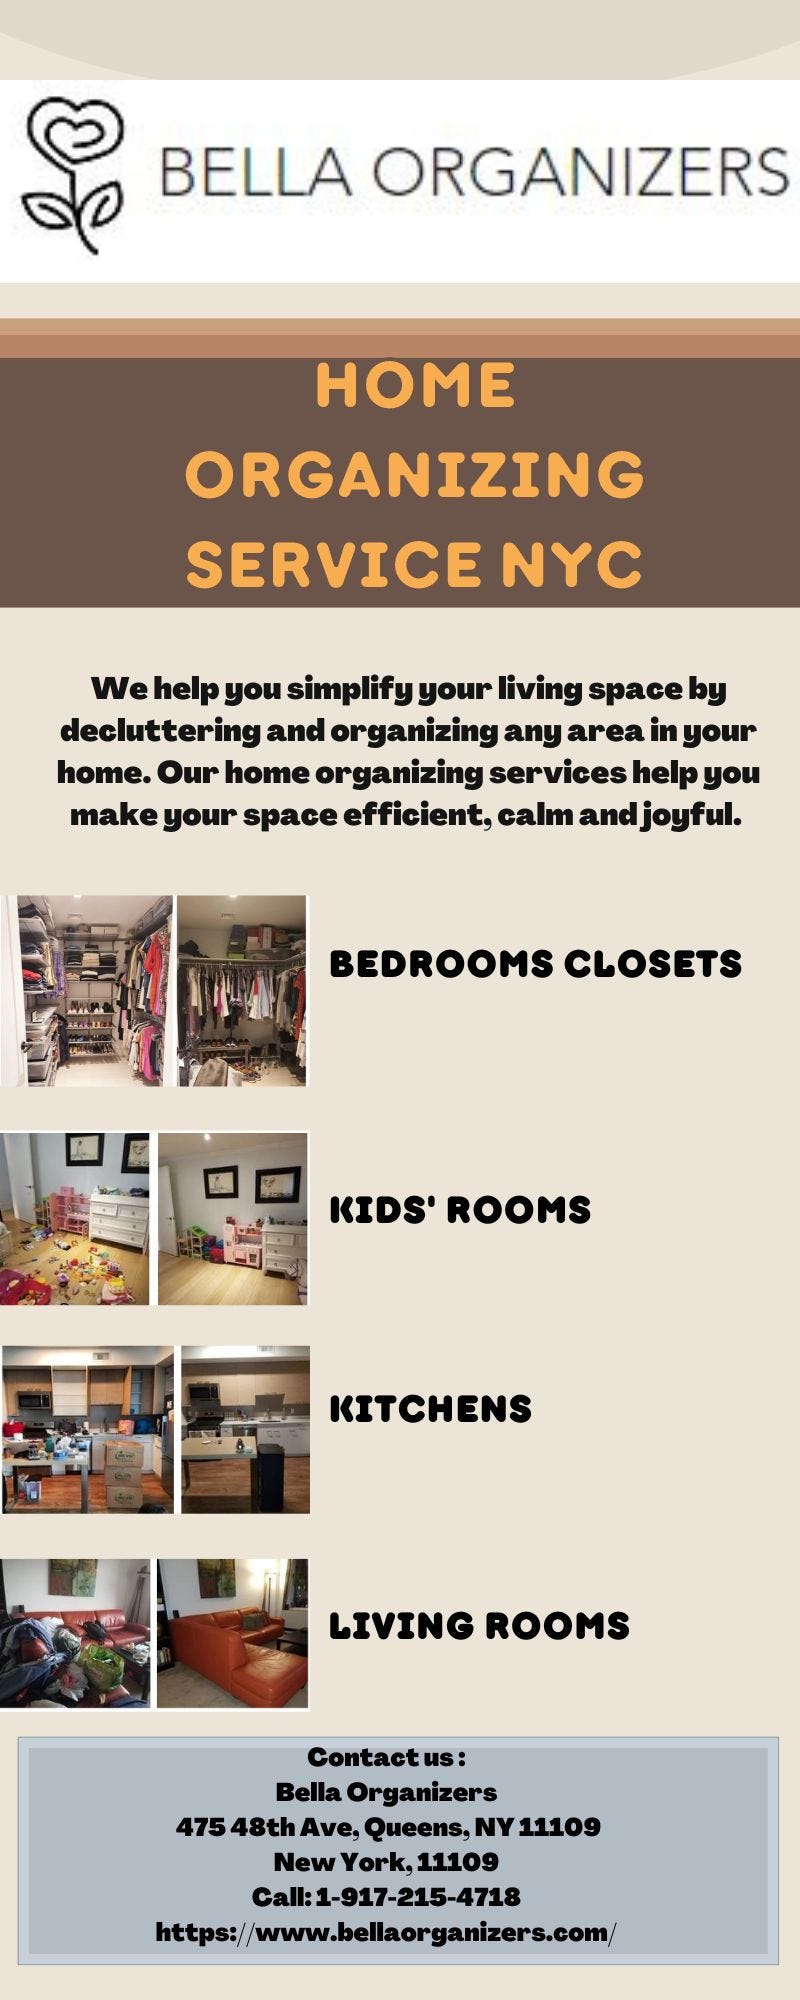 We organizing any area of your home in your budget - Bella Organizers -  bella organizers - Medium